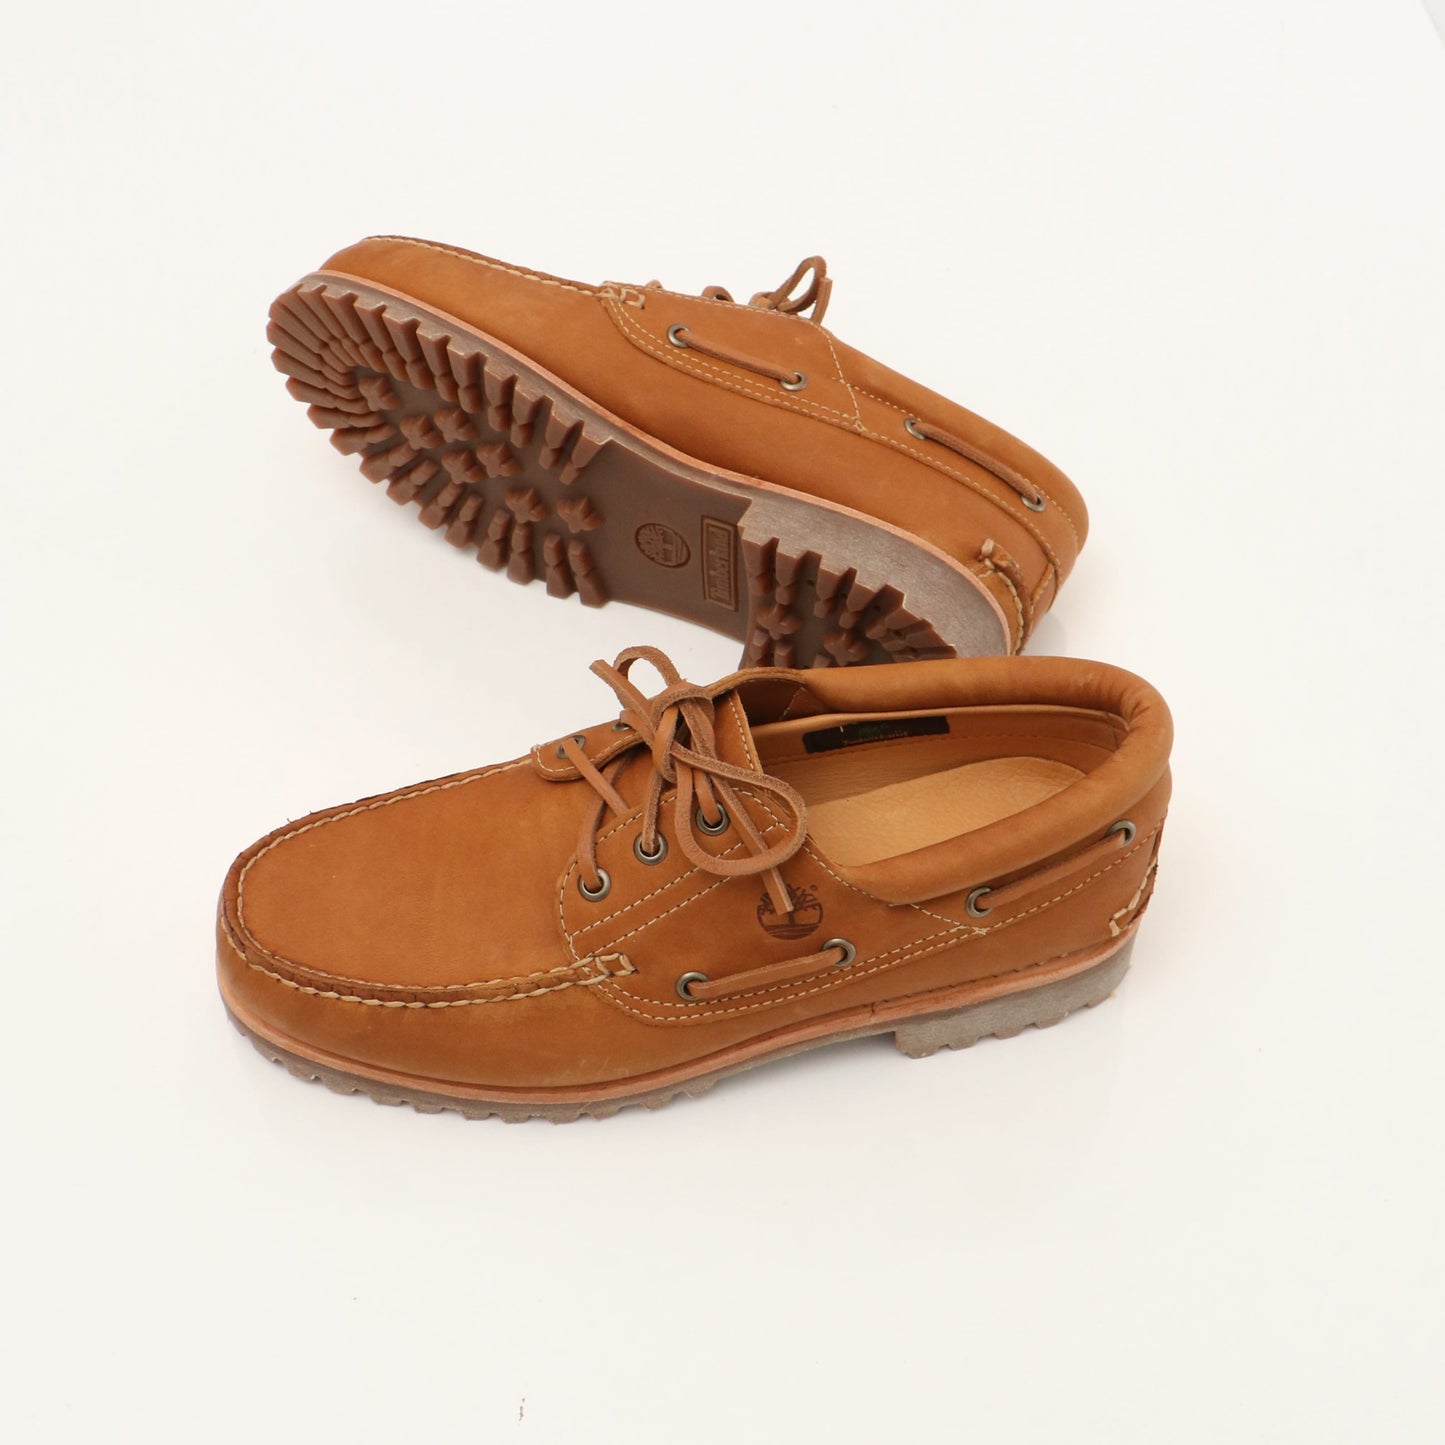 AUTHENTIC HANDSEWN BOAT SHOES